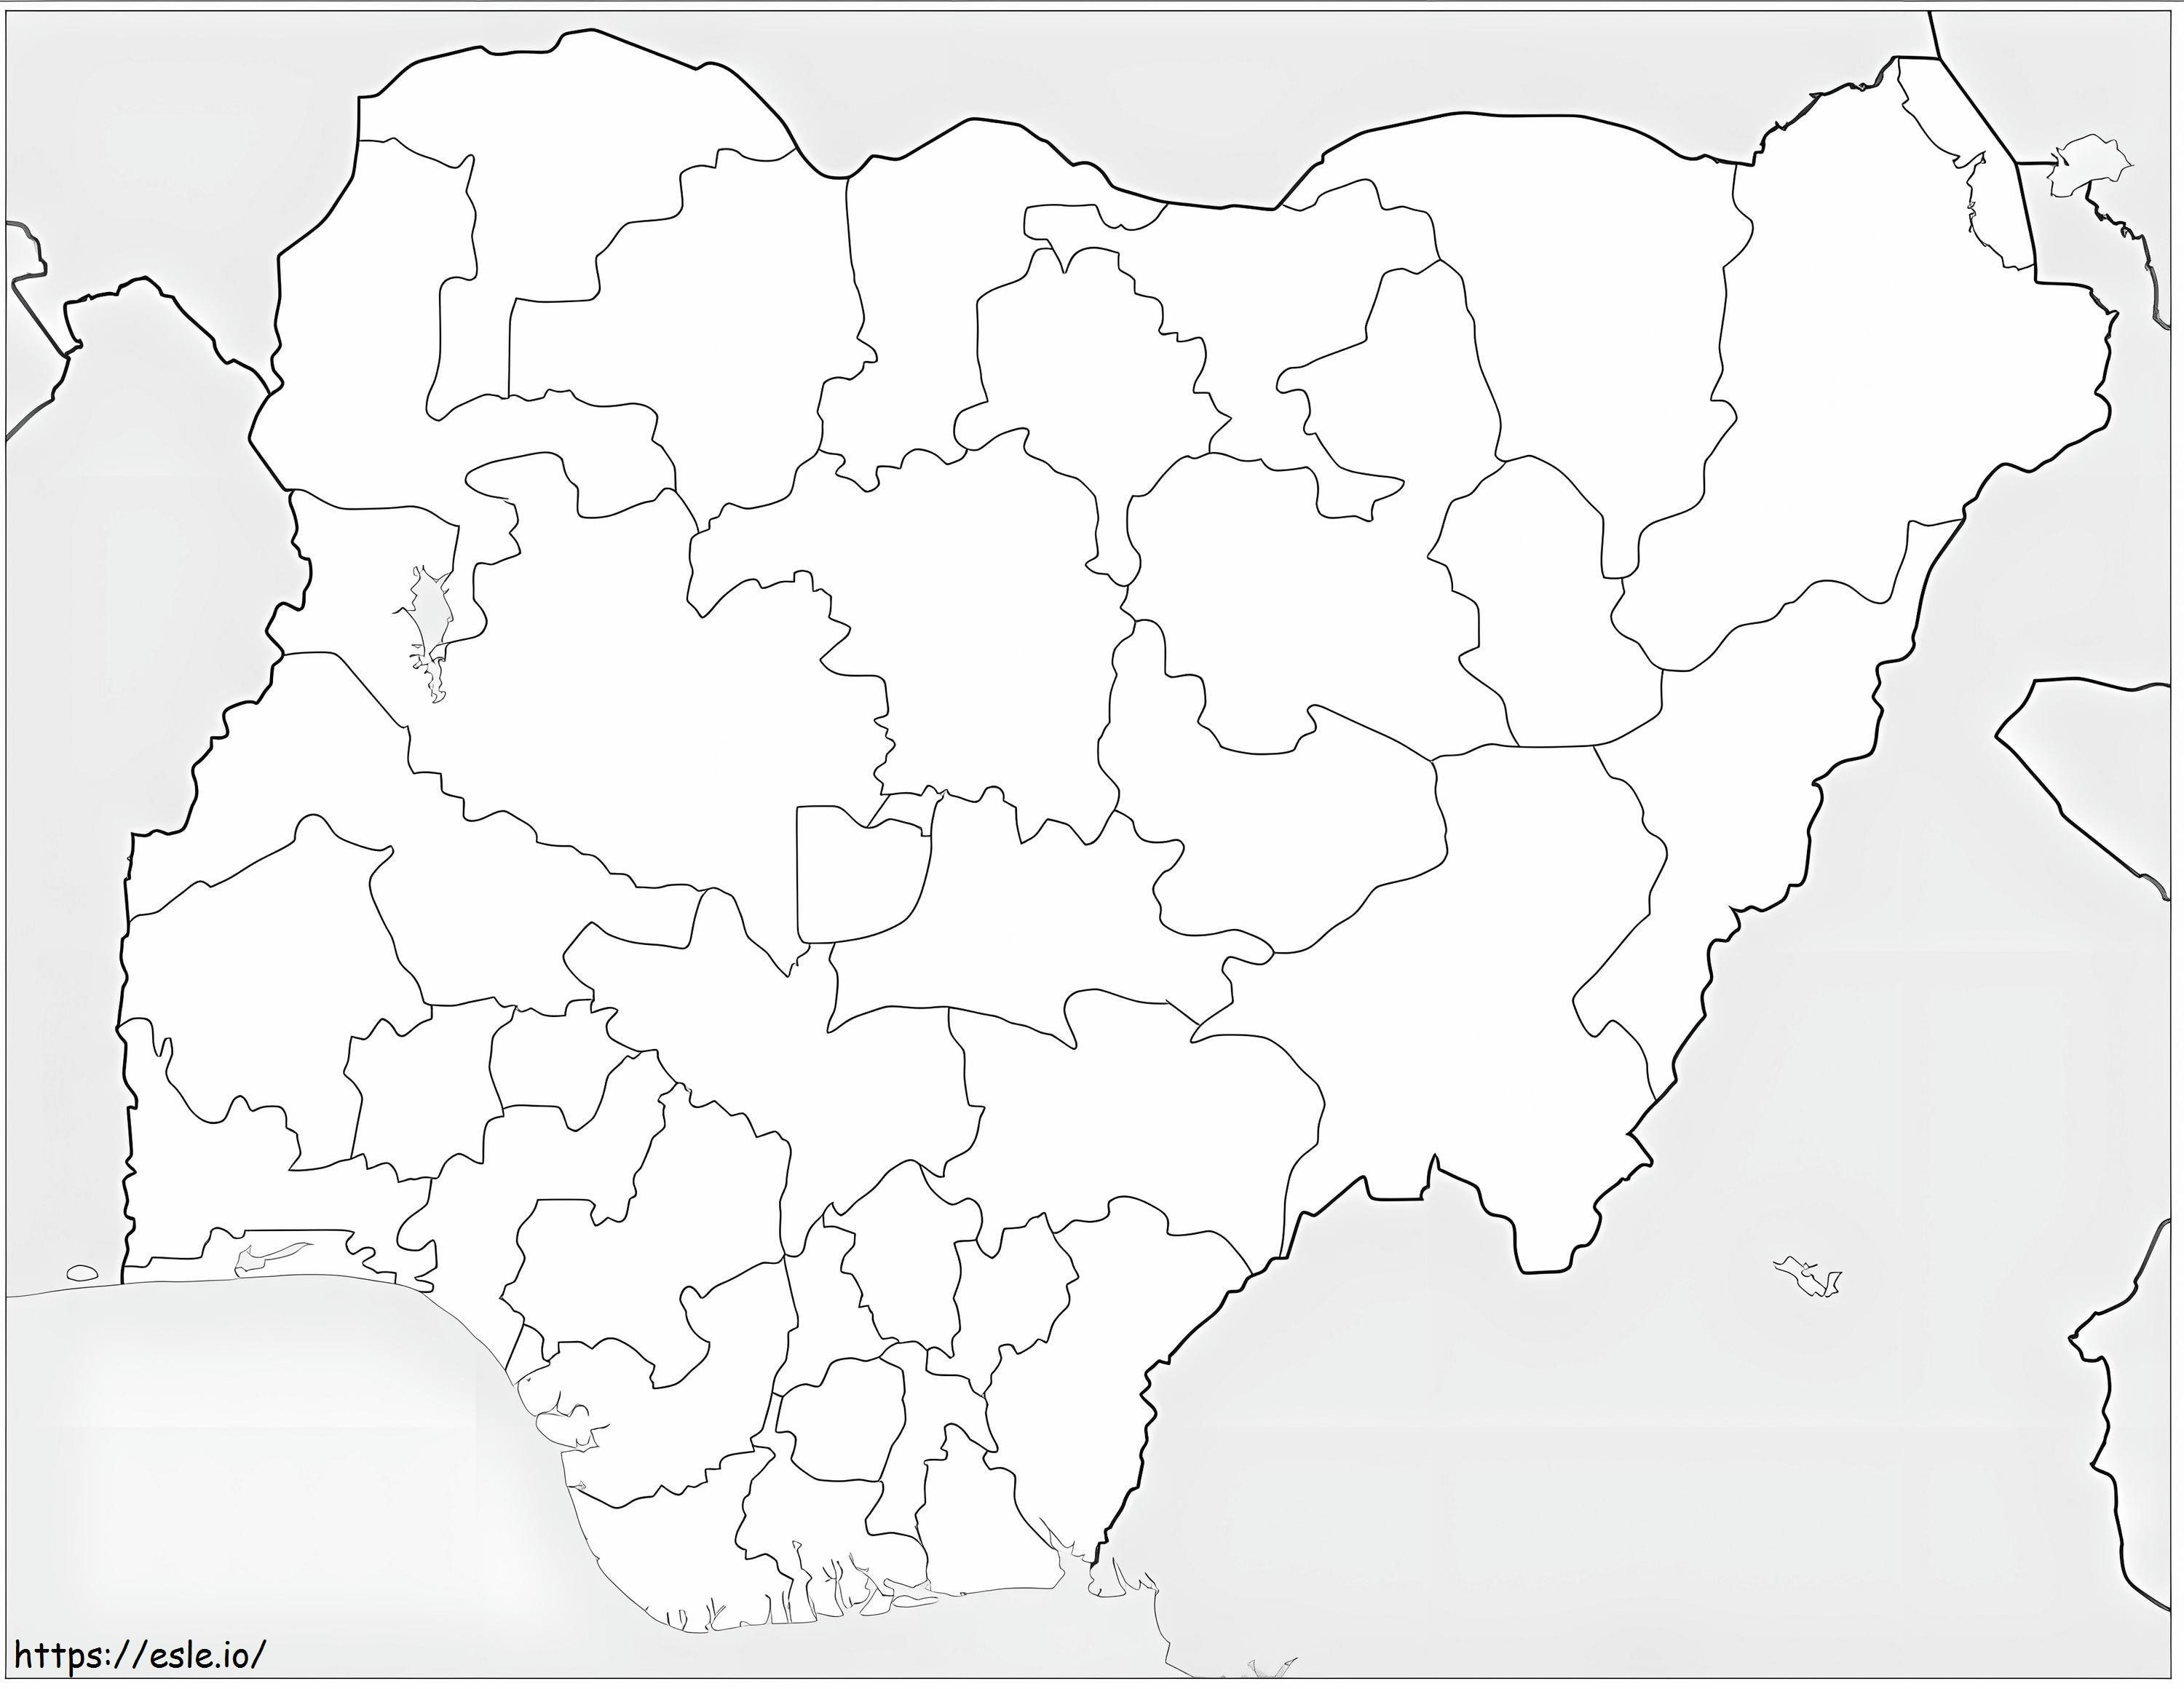 Nigeria'S Map coloring page